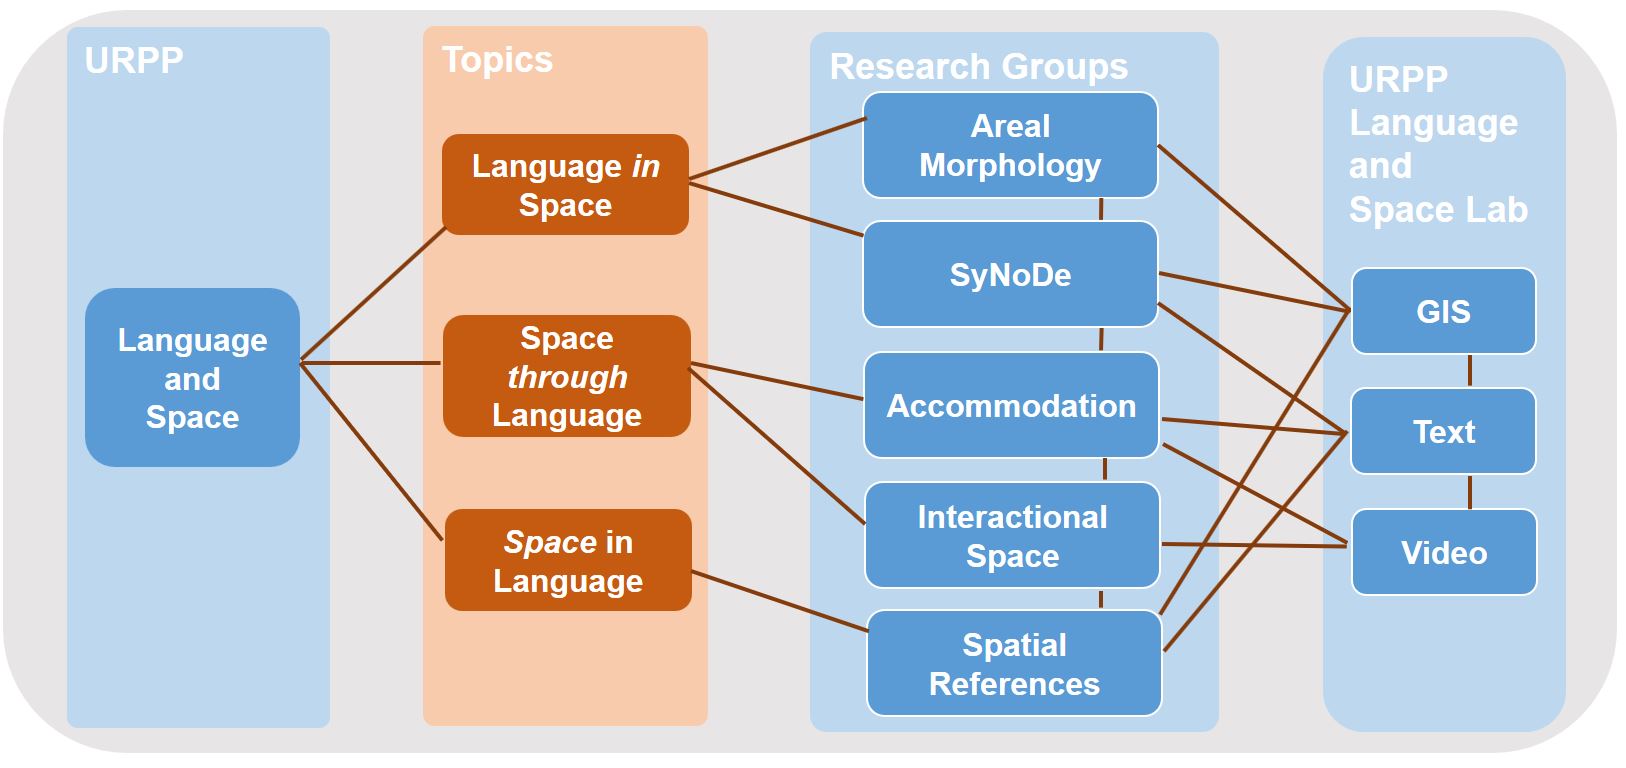 research groups and topics